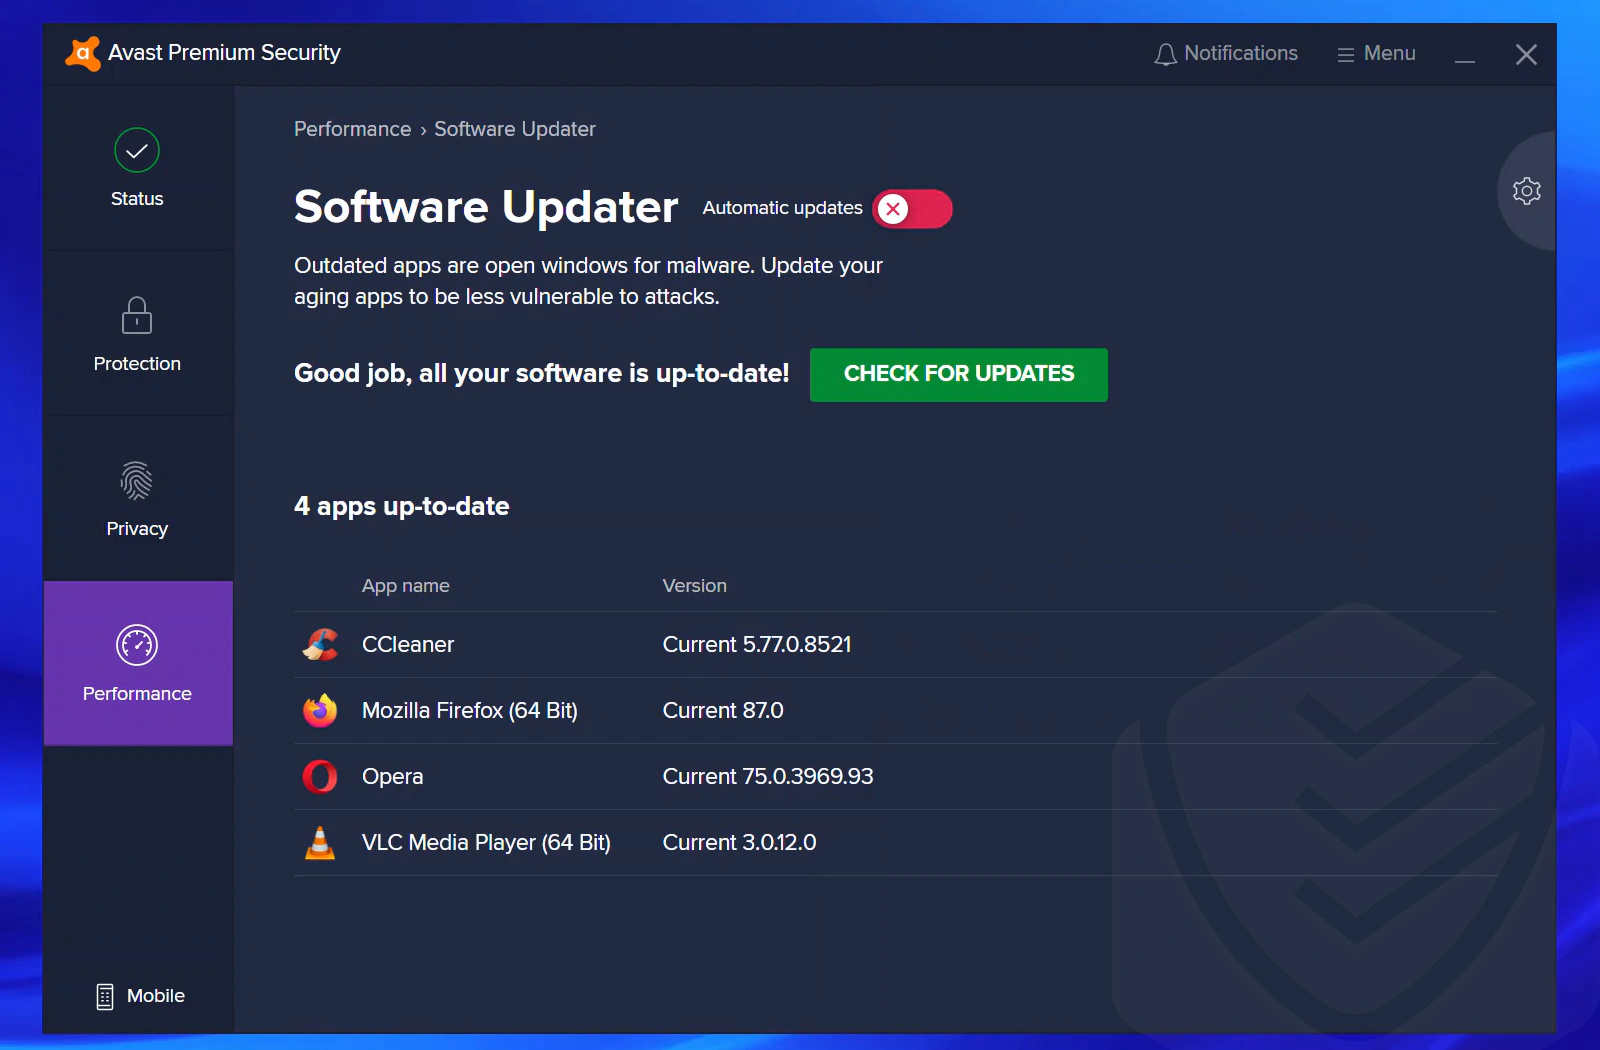 Avast Software Updater interface